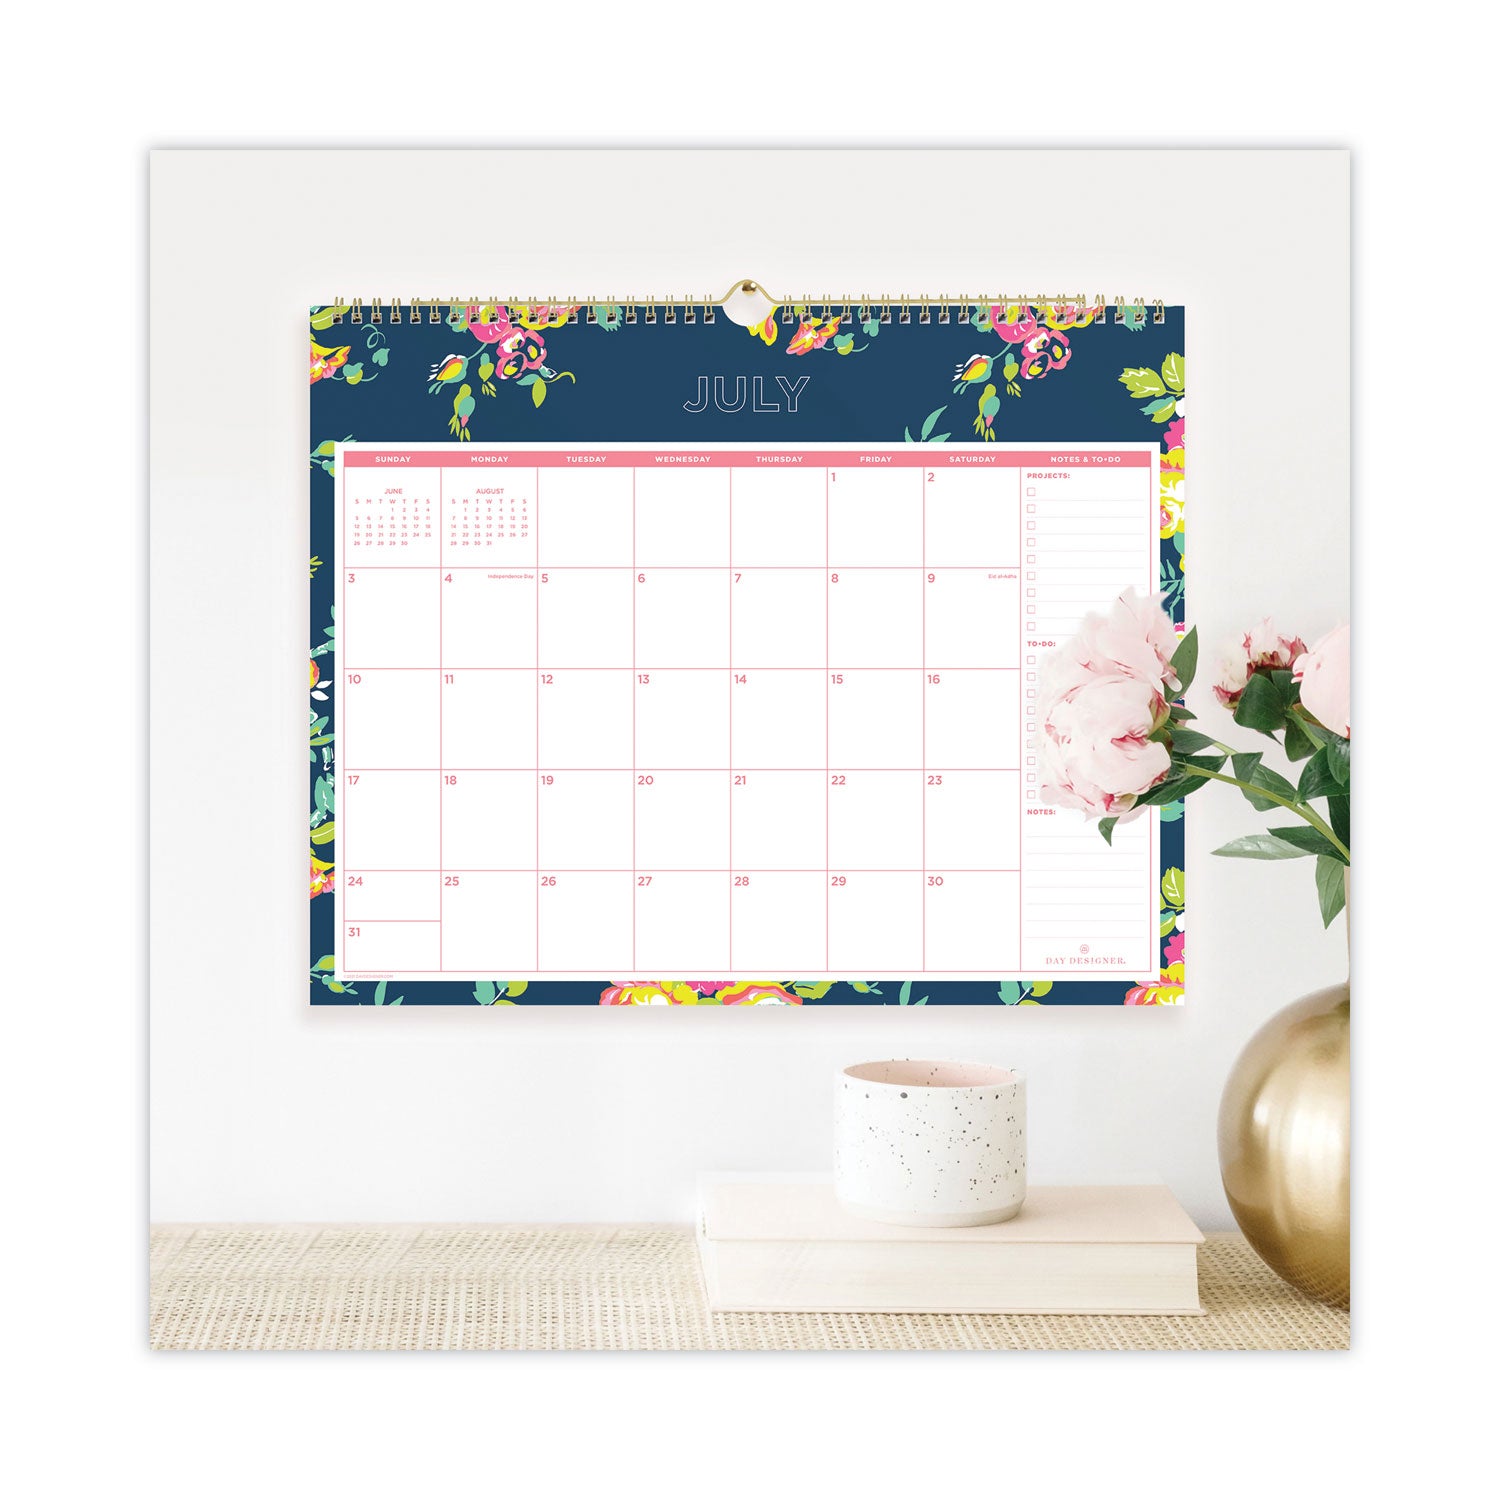 day-designer-peyton-academic-wall-calendar-floral-artwork-15-x-12-white-navy-sheets-12-month-july-to-june-2023-to-2024_bls107934 - 3